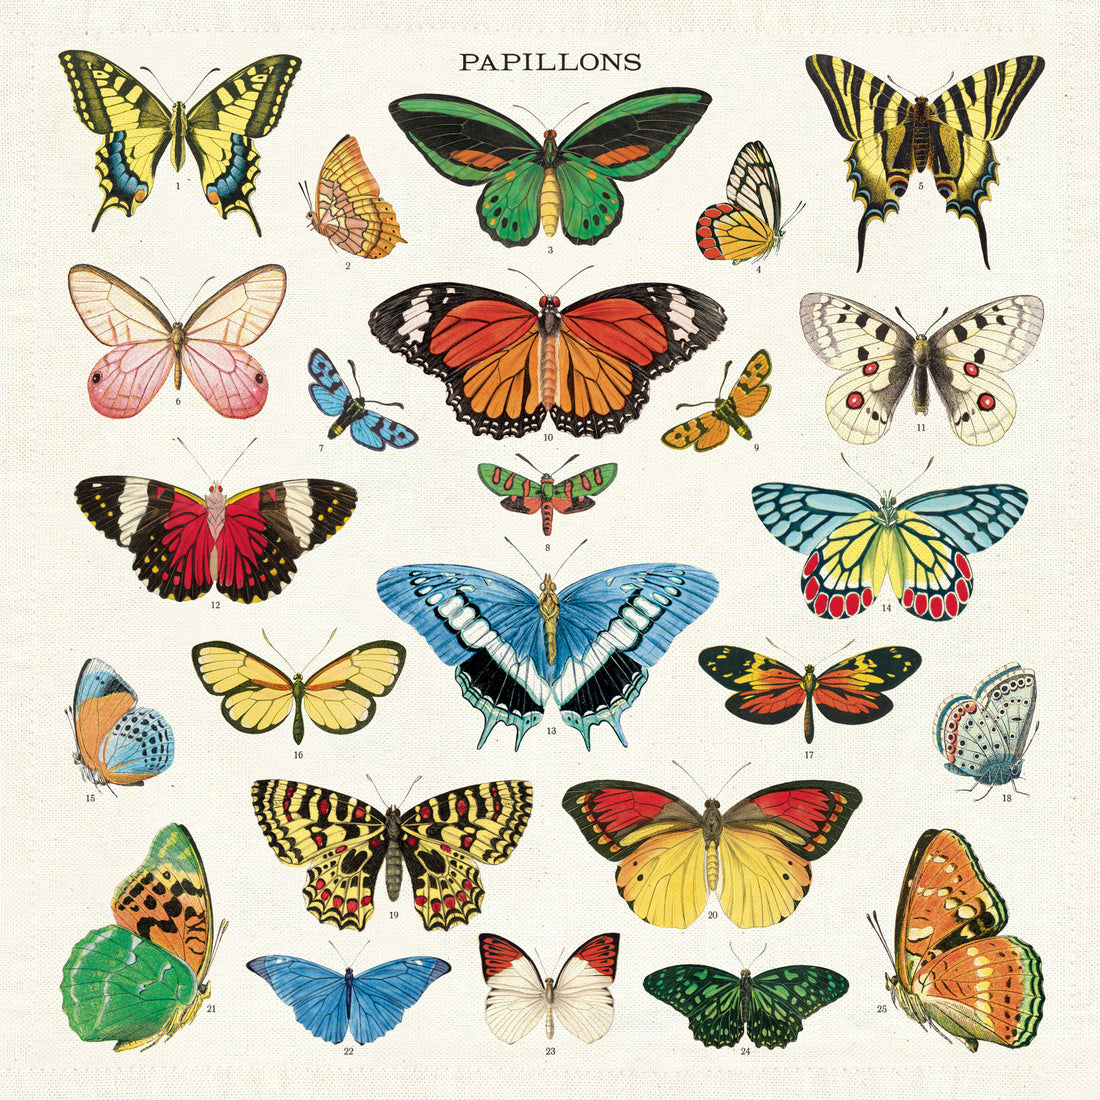 Illustration of various species of colorful butterflies from the Cavallini Papers &amp; Co archives.